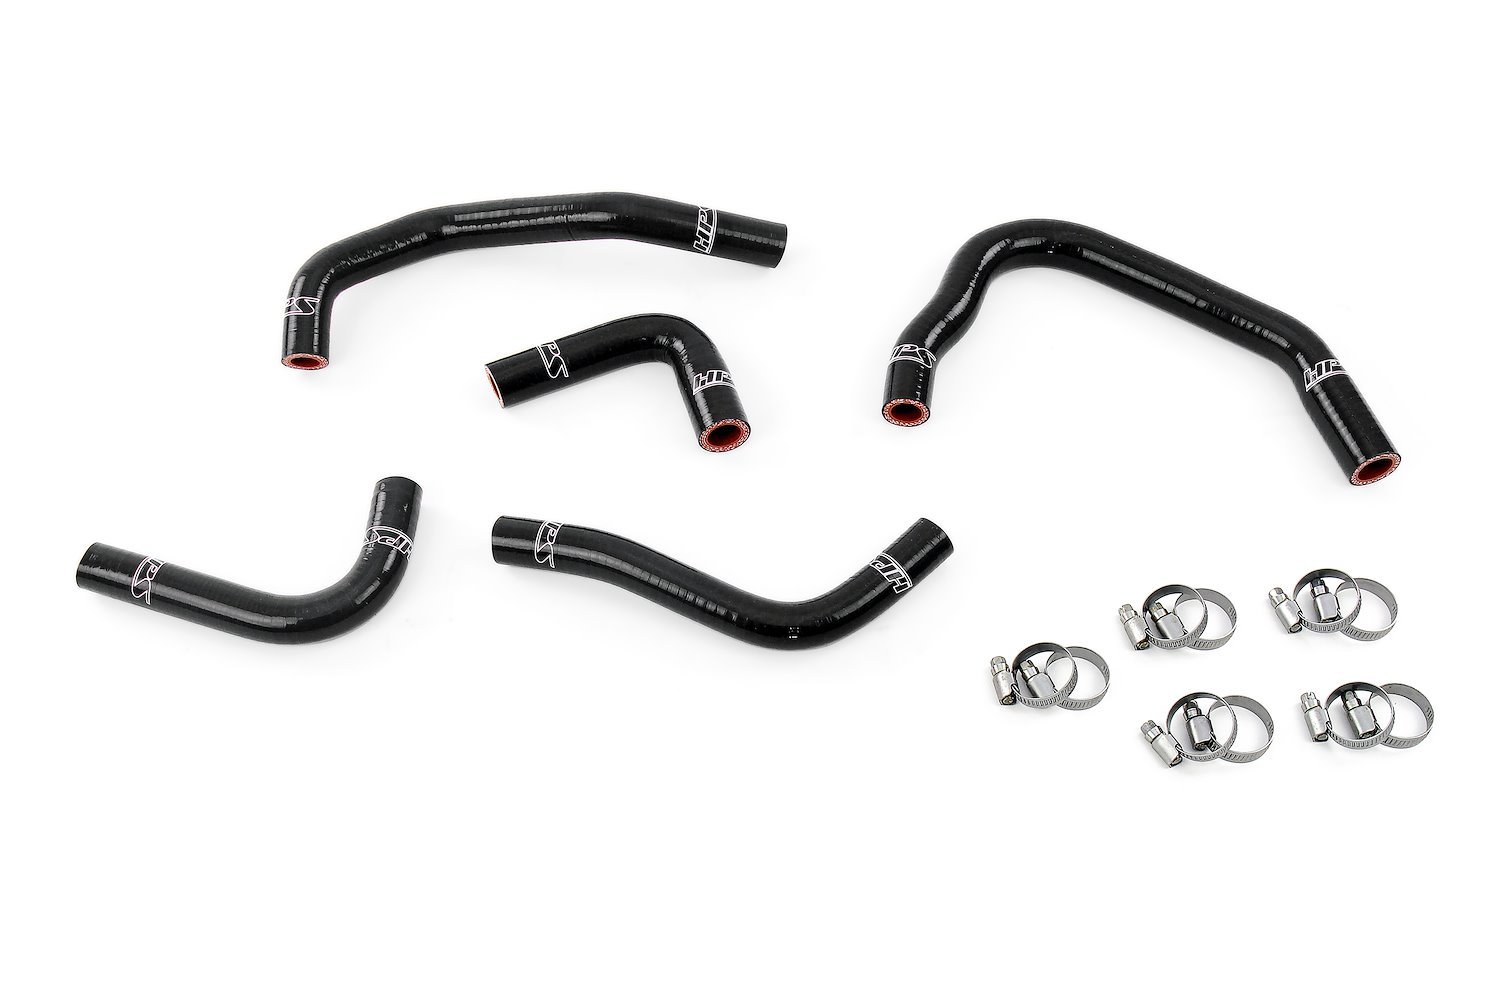 57-1285H-BLK Heater Hose Kit, High-Temp 3-Ply Reinforced Silicone, Replace OEM Rubber Heater Coolant Hoses